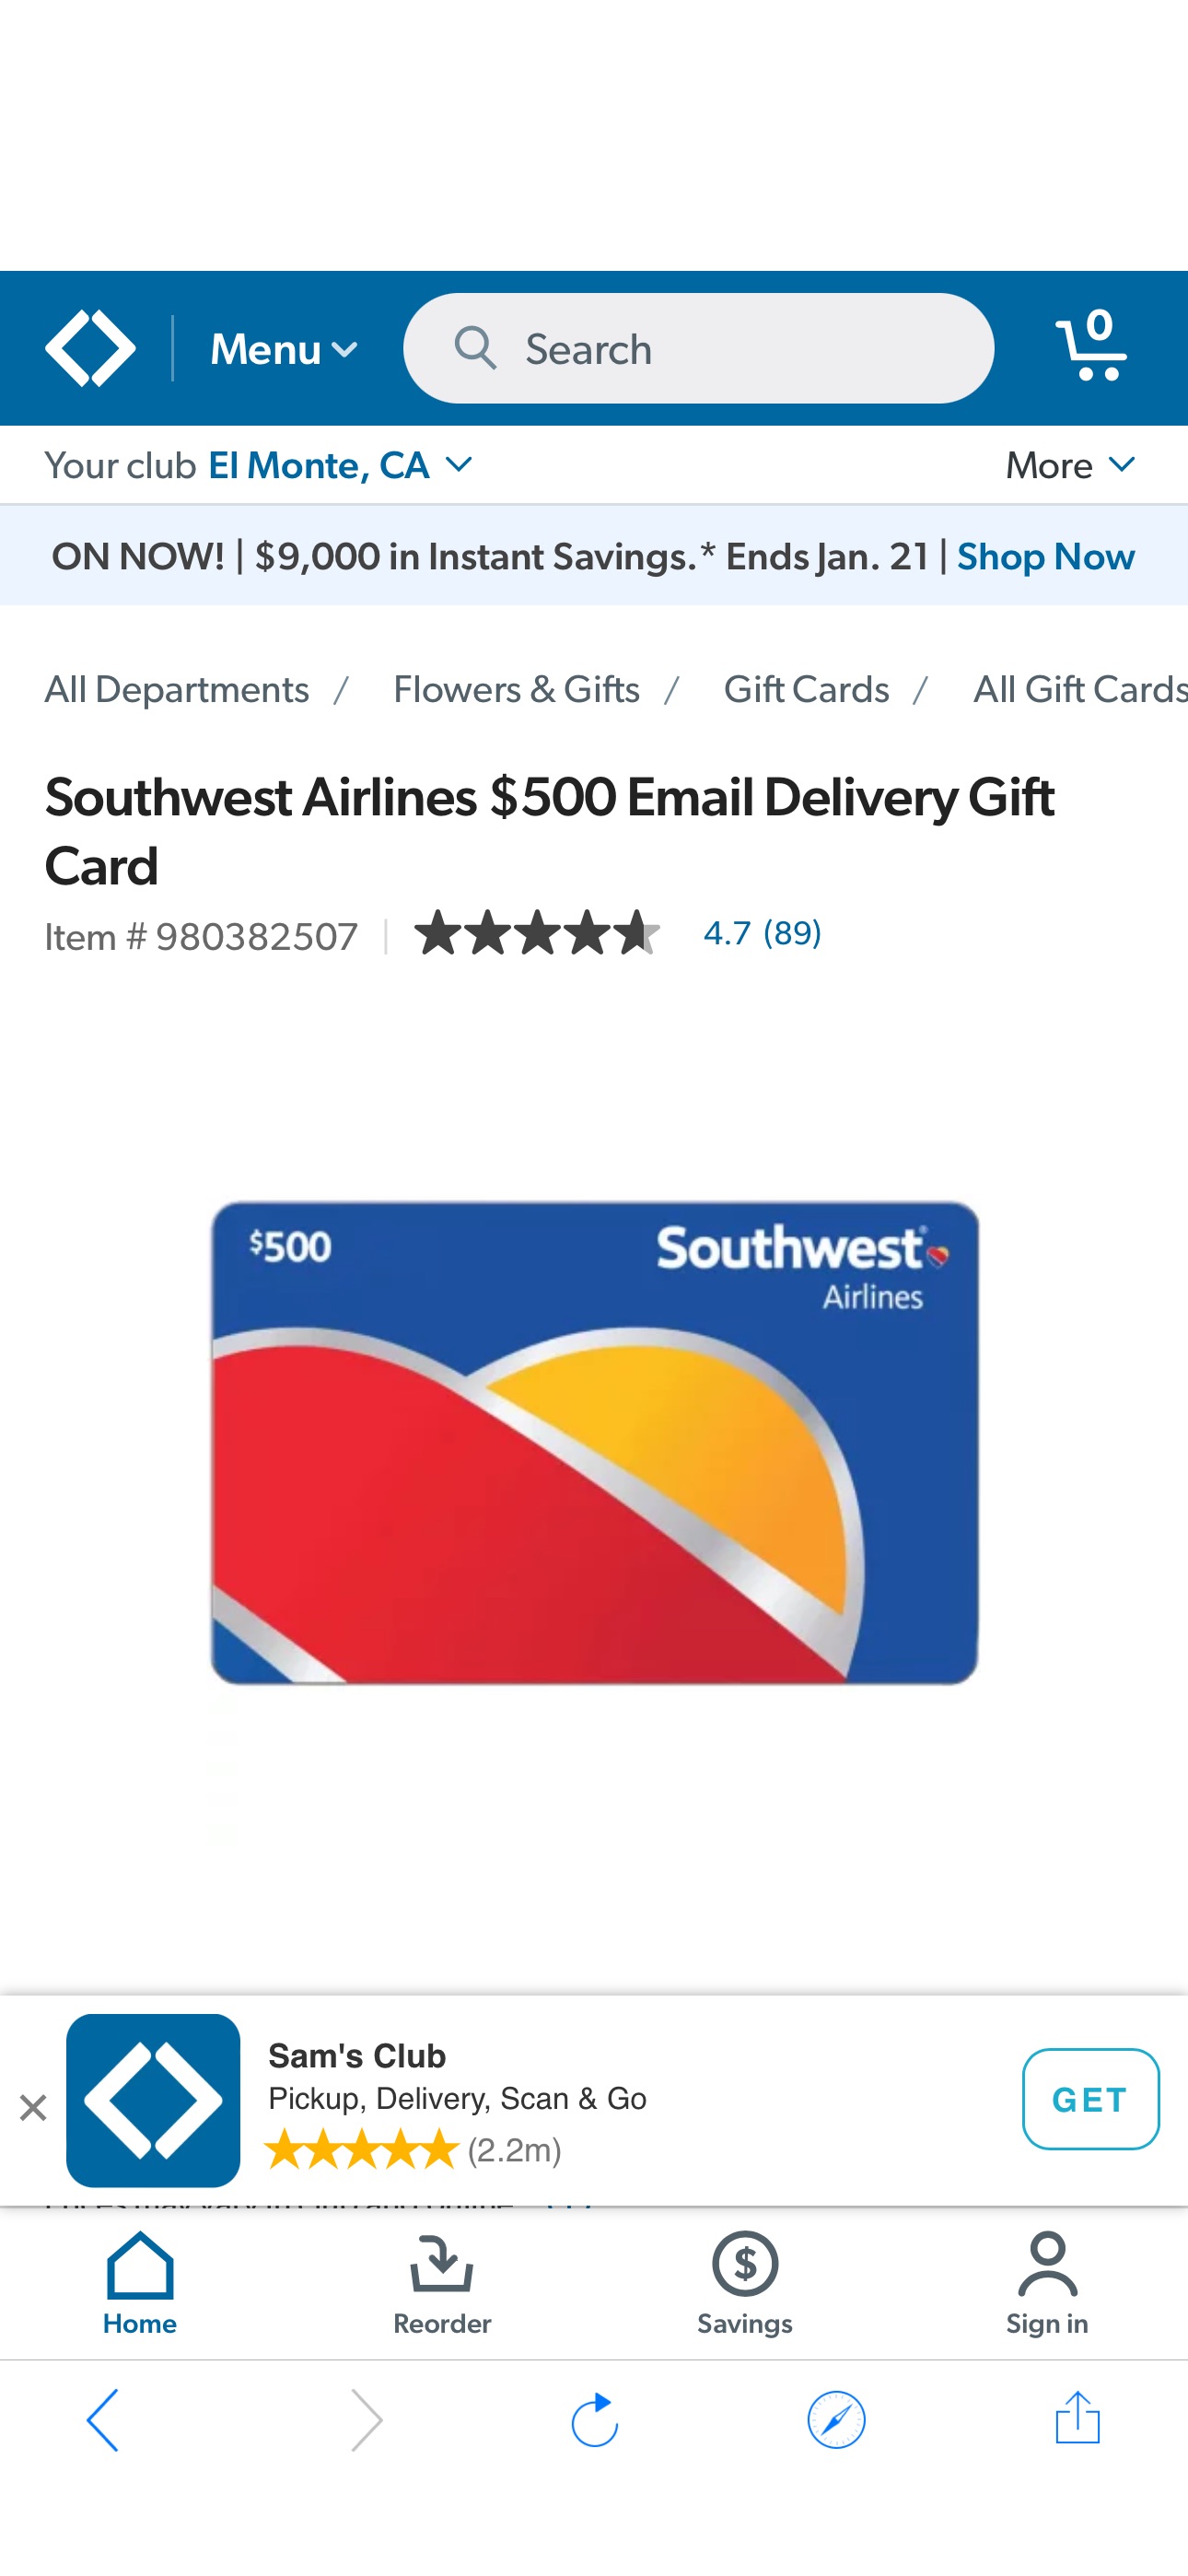 Southwest Airlines $500 Email Delivery Gift Card - Sam's Club